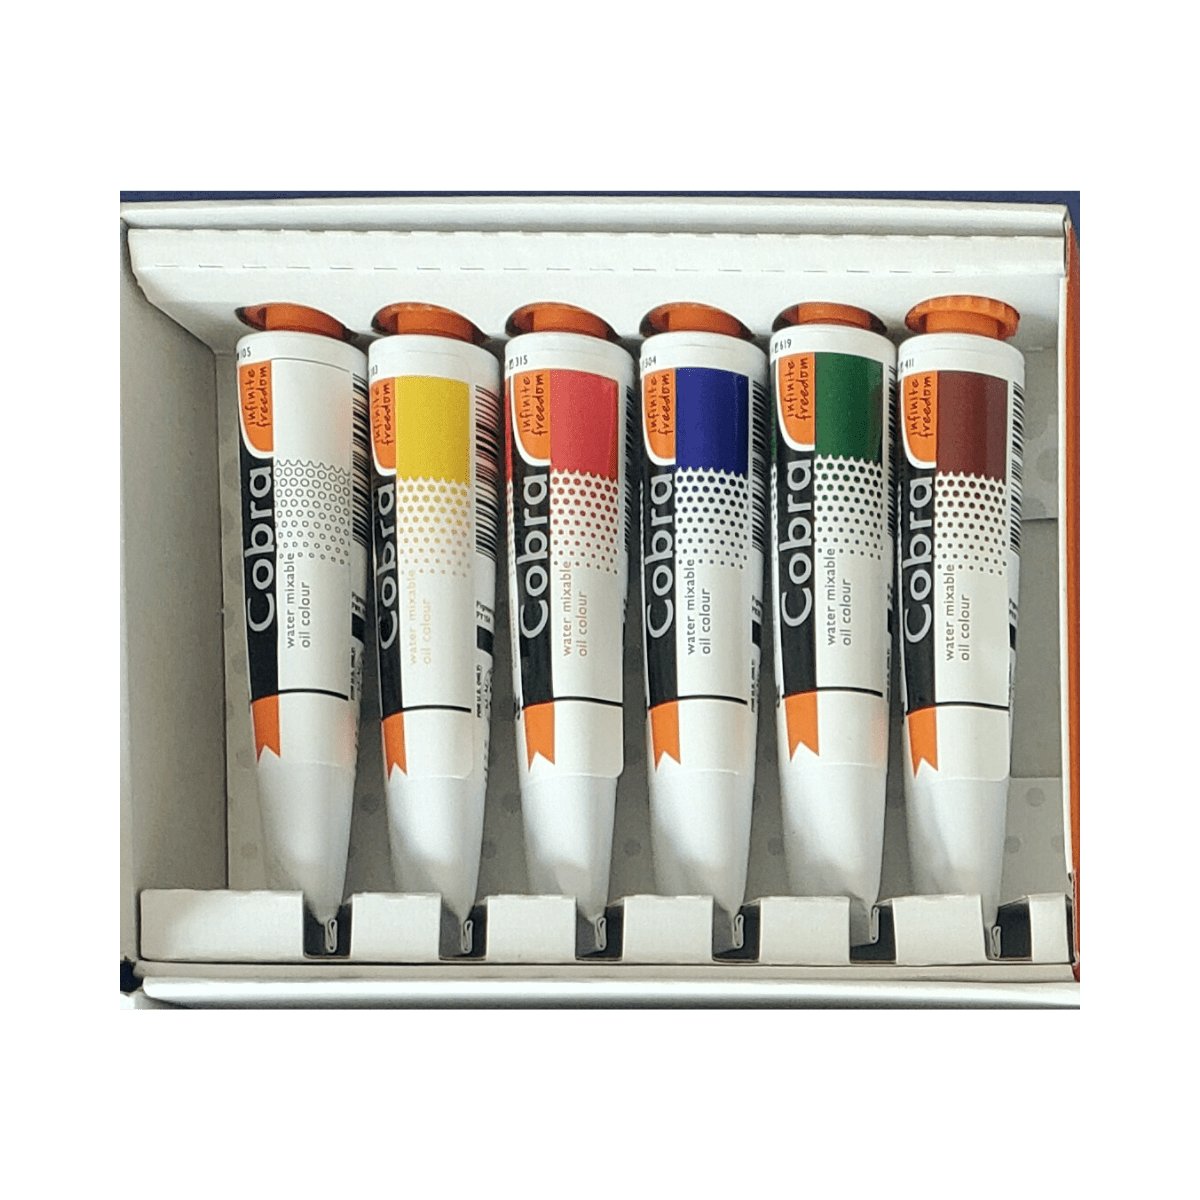 Kensington Art Supply - NEW IN STORE: Cobra Water-soluble Oil paints! Cobra  Water Mixable Oils always produces a wonderful and long-lasting result  without the use of solvents such as white spirit and